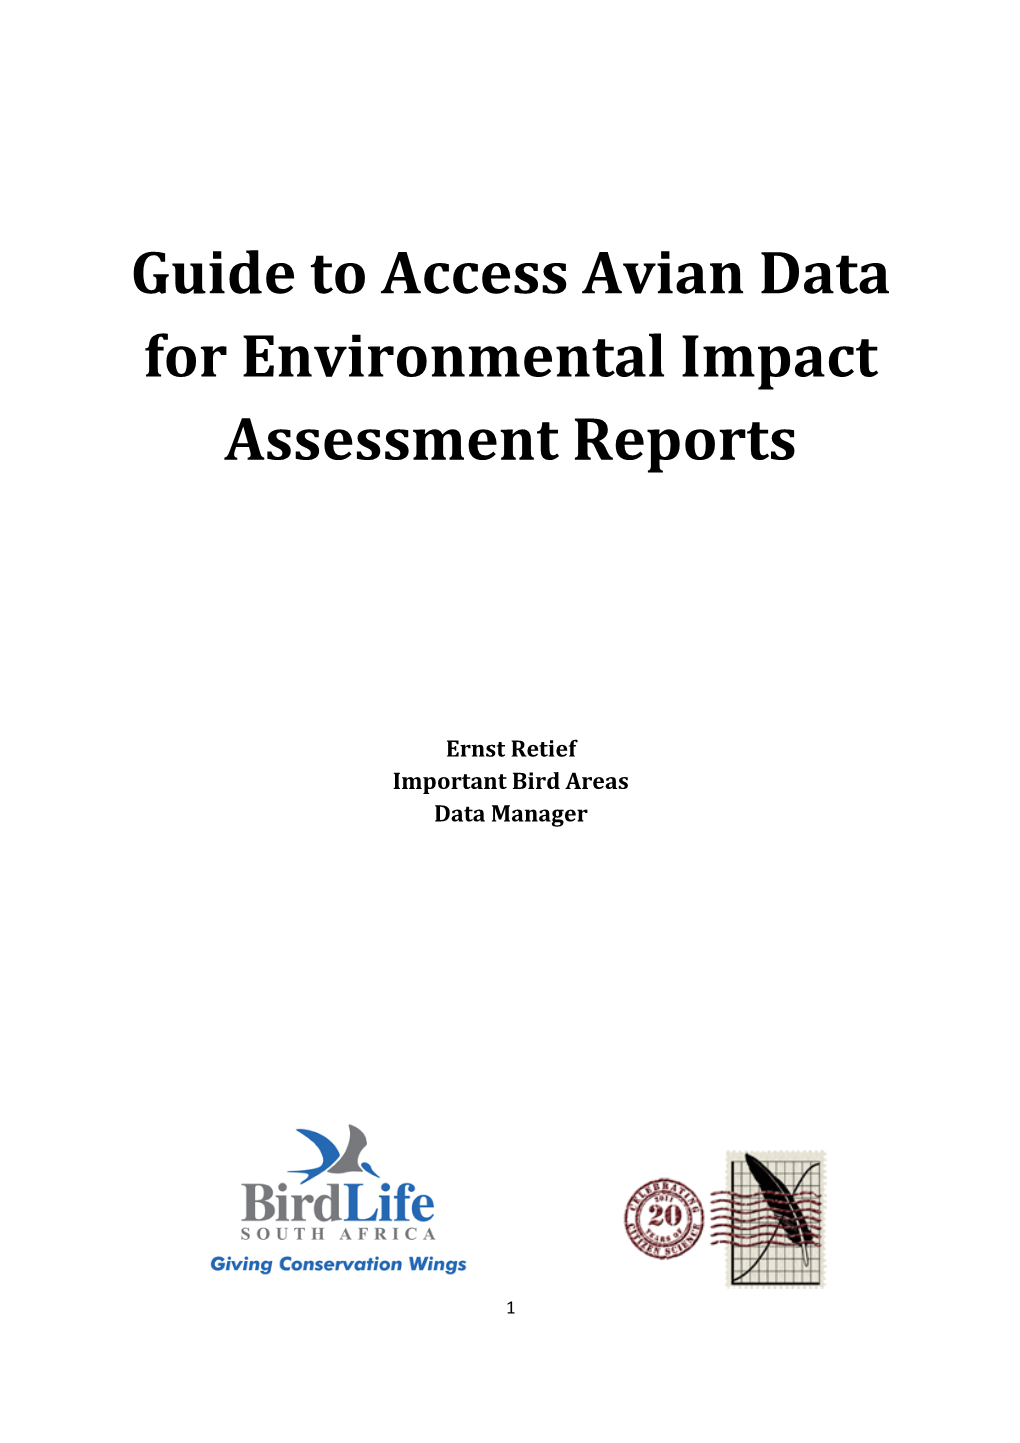 Guide to Access Avian Data for Environmental Impact Assessment Reports